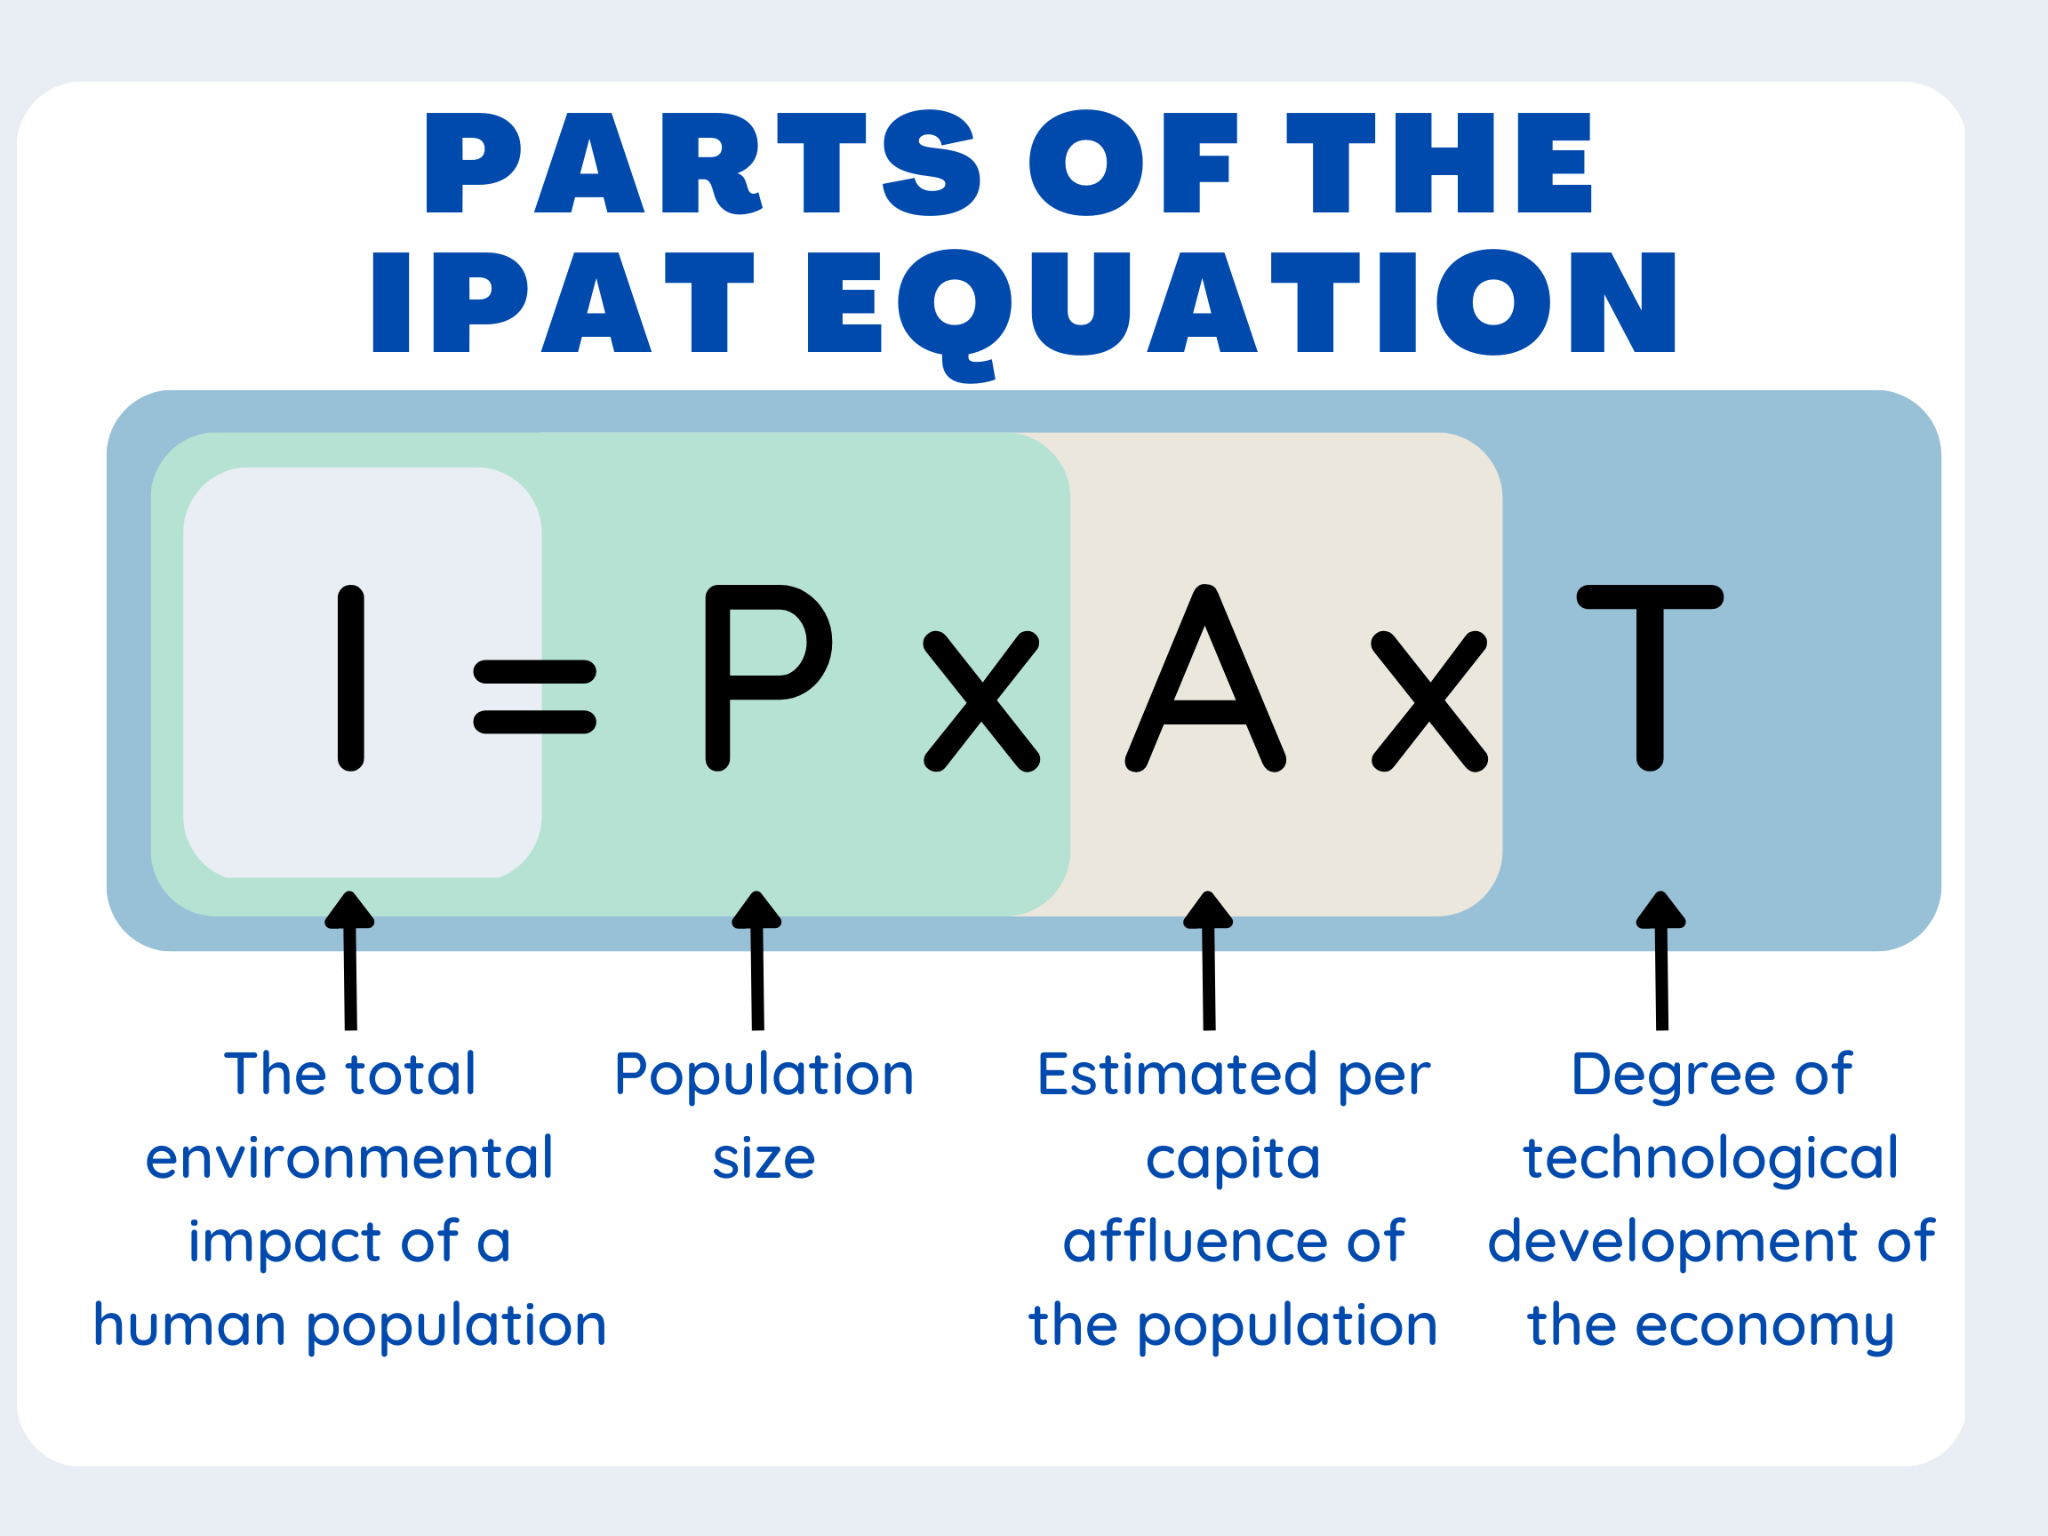 This figure shows the parts of the IPAT equation, which demonstrates the total environmental impact of a population by assessing population size, estimated per capita affluence of the population, and degree of technological development of the economy.